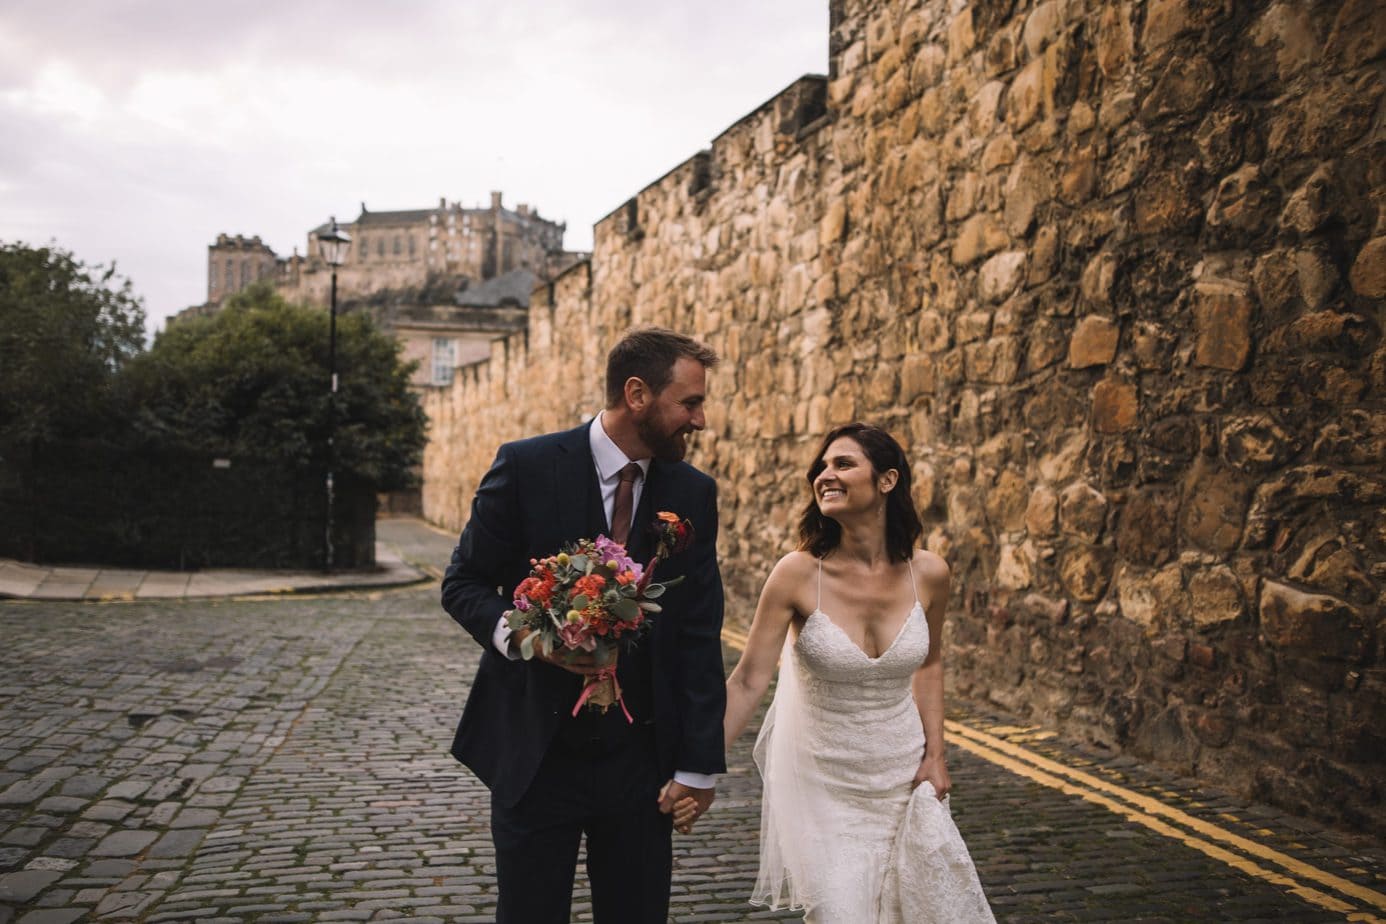 Couple walking up a cobbled street smiling at each other with Edinburgh castle in the background during their elopement